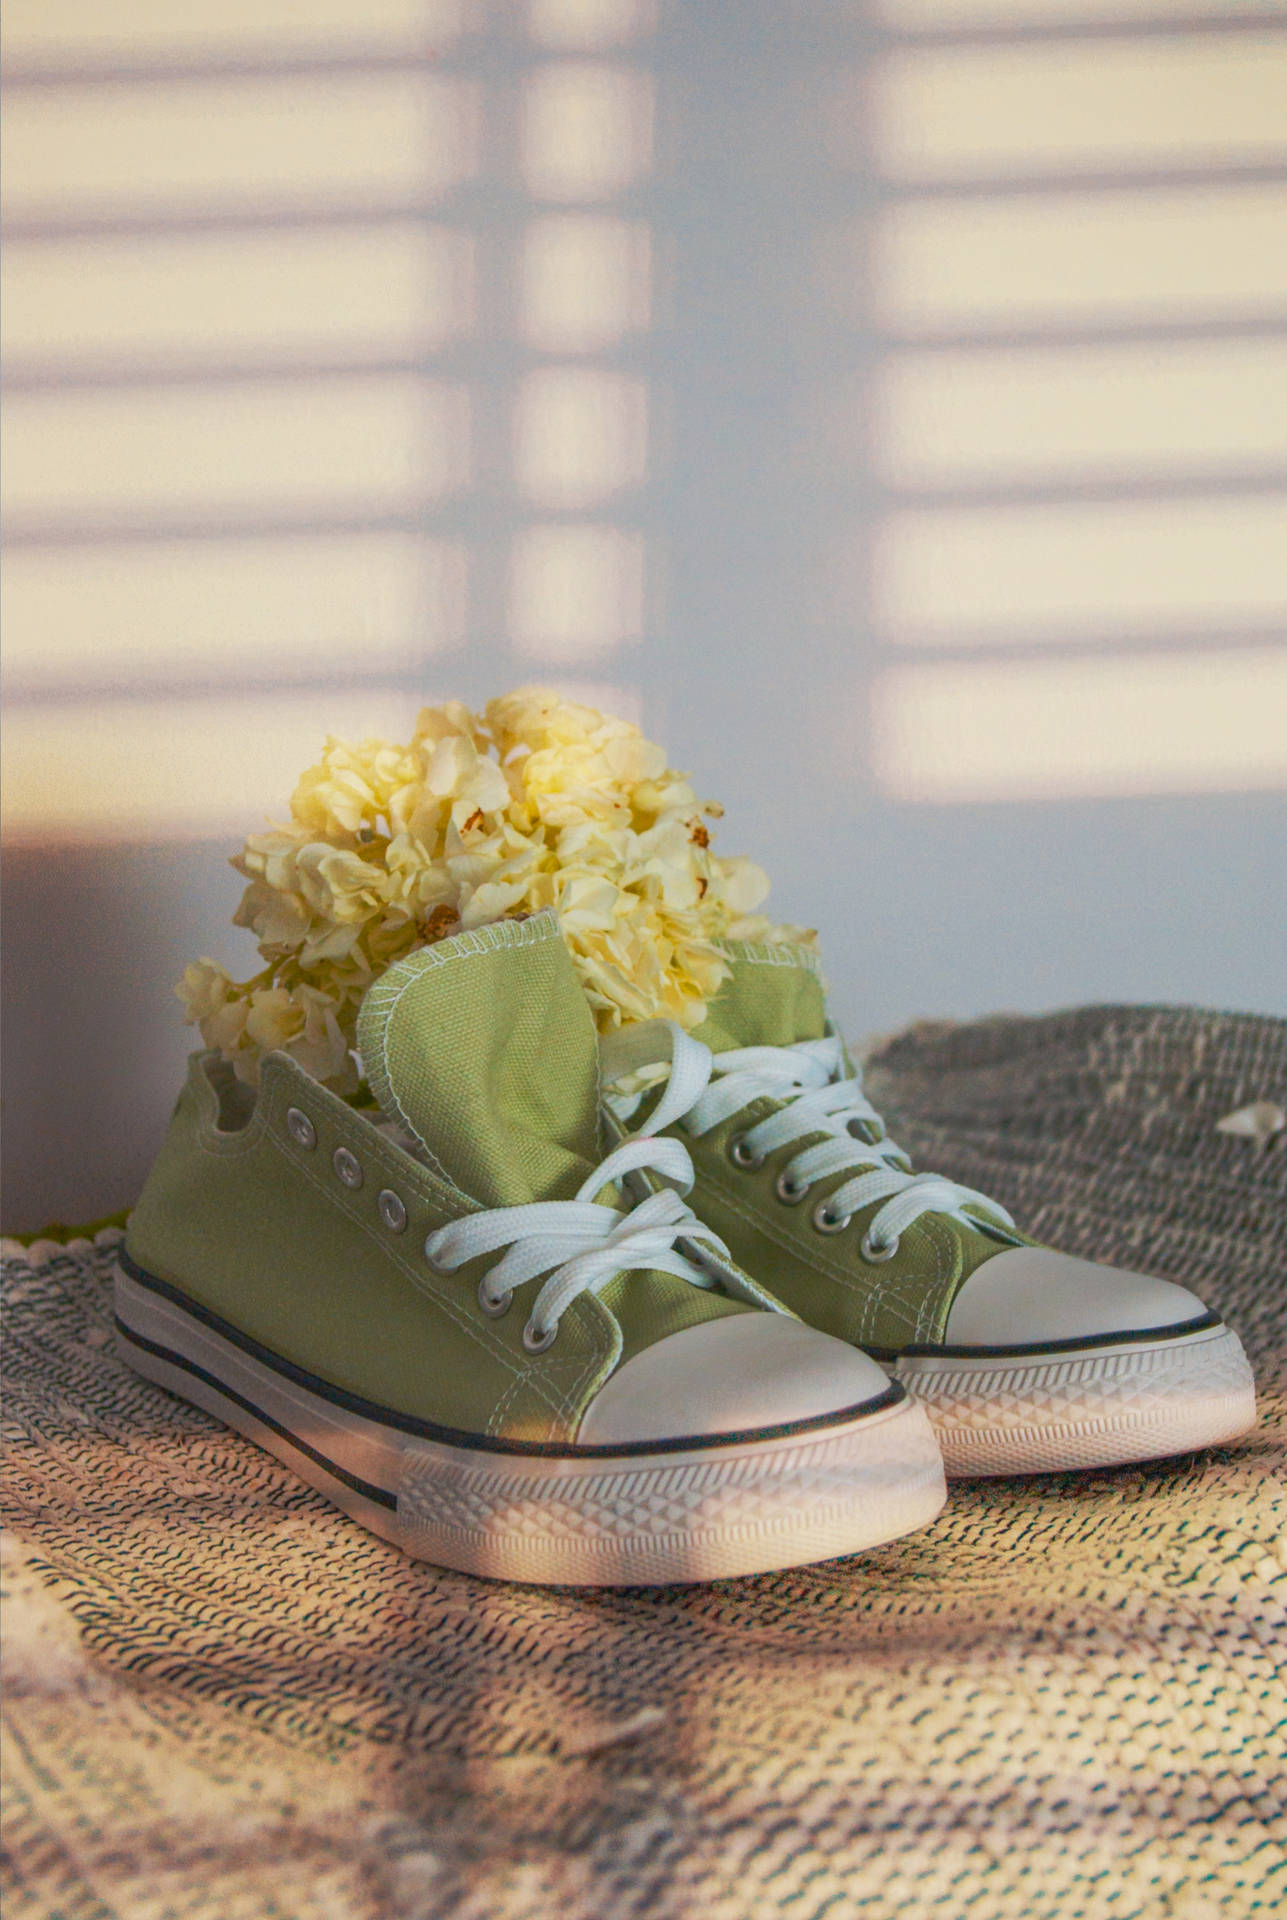 Embrace the style and comfort of these sleek green Converse sneakers. Wallpaper